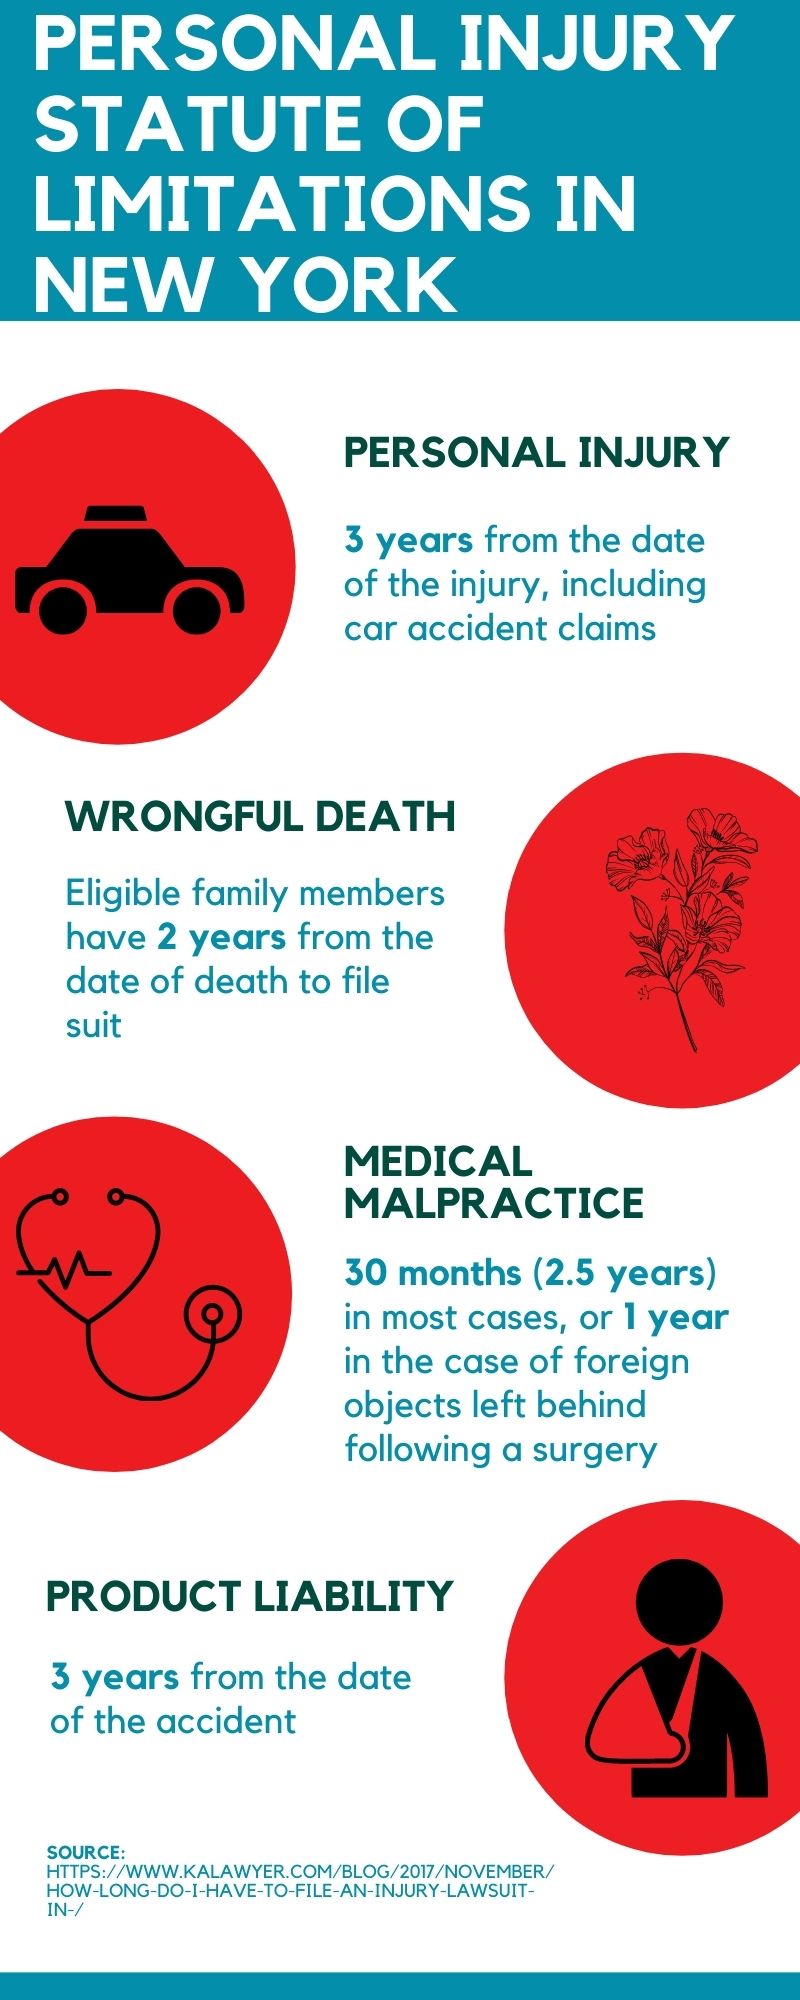 Infographic: Personal Injury Statute of Limitations in New York. Personal Injury: 3 years from the date of the injury, including car accident claims. Wrongful Death: Eligible family members have 2 years from the date of death to file suit. Medical Malpractice: 30 months (2.5 years) in most cases, or 1 year in the case of foreign objects left behind following a surgery. Product Liability: 3 years from the date of the accident.